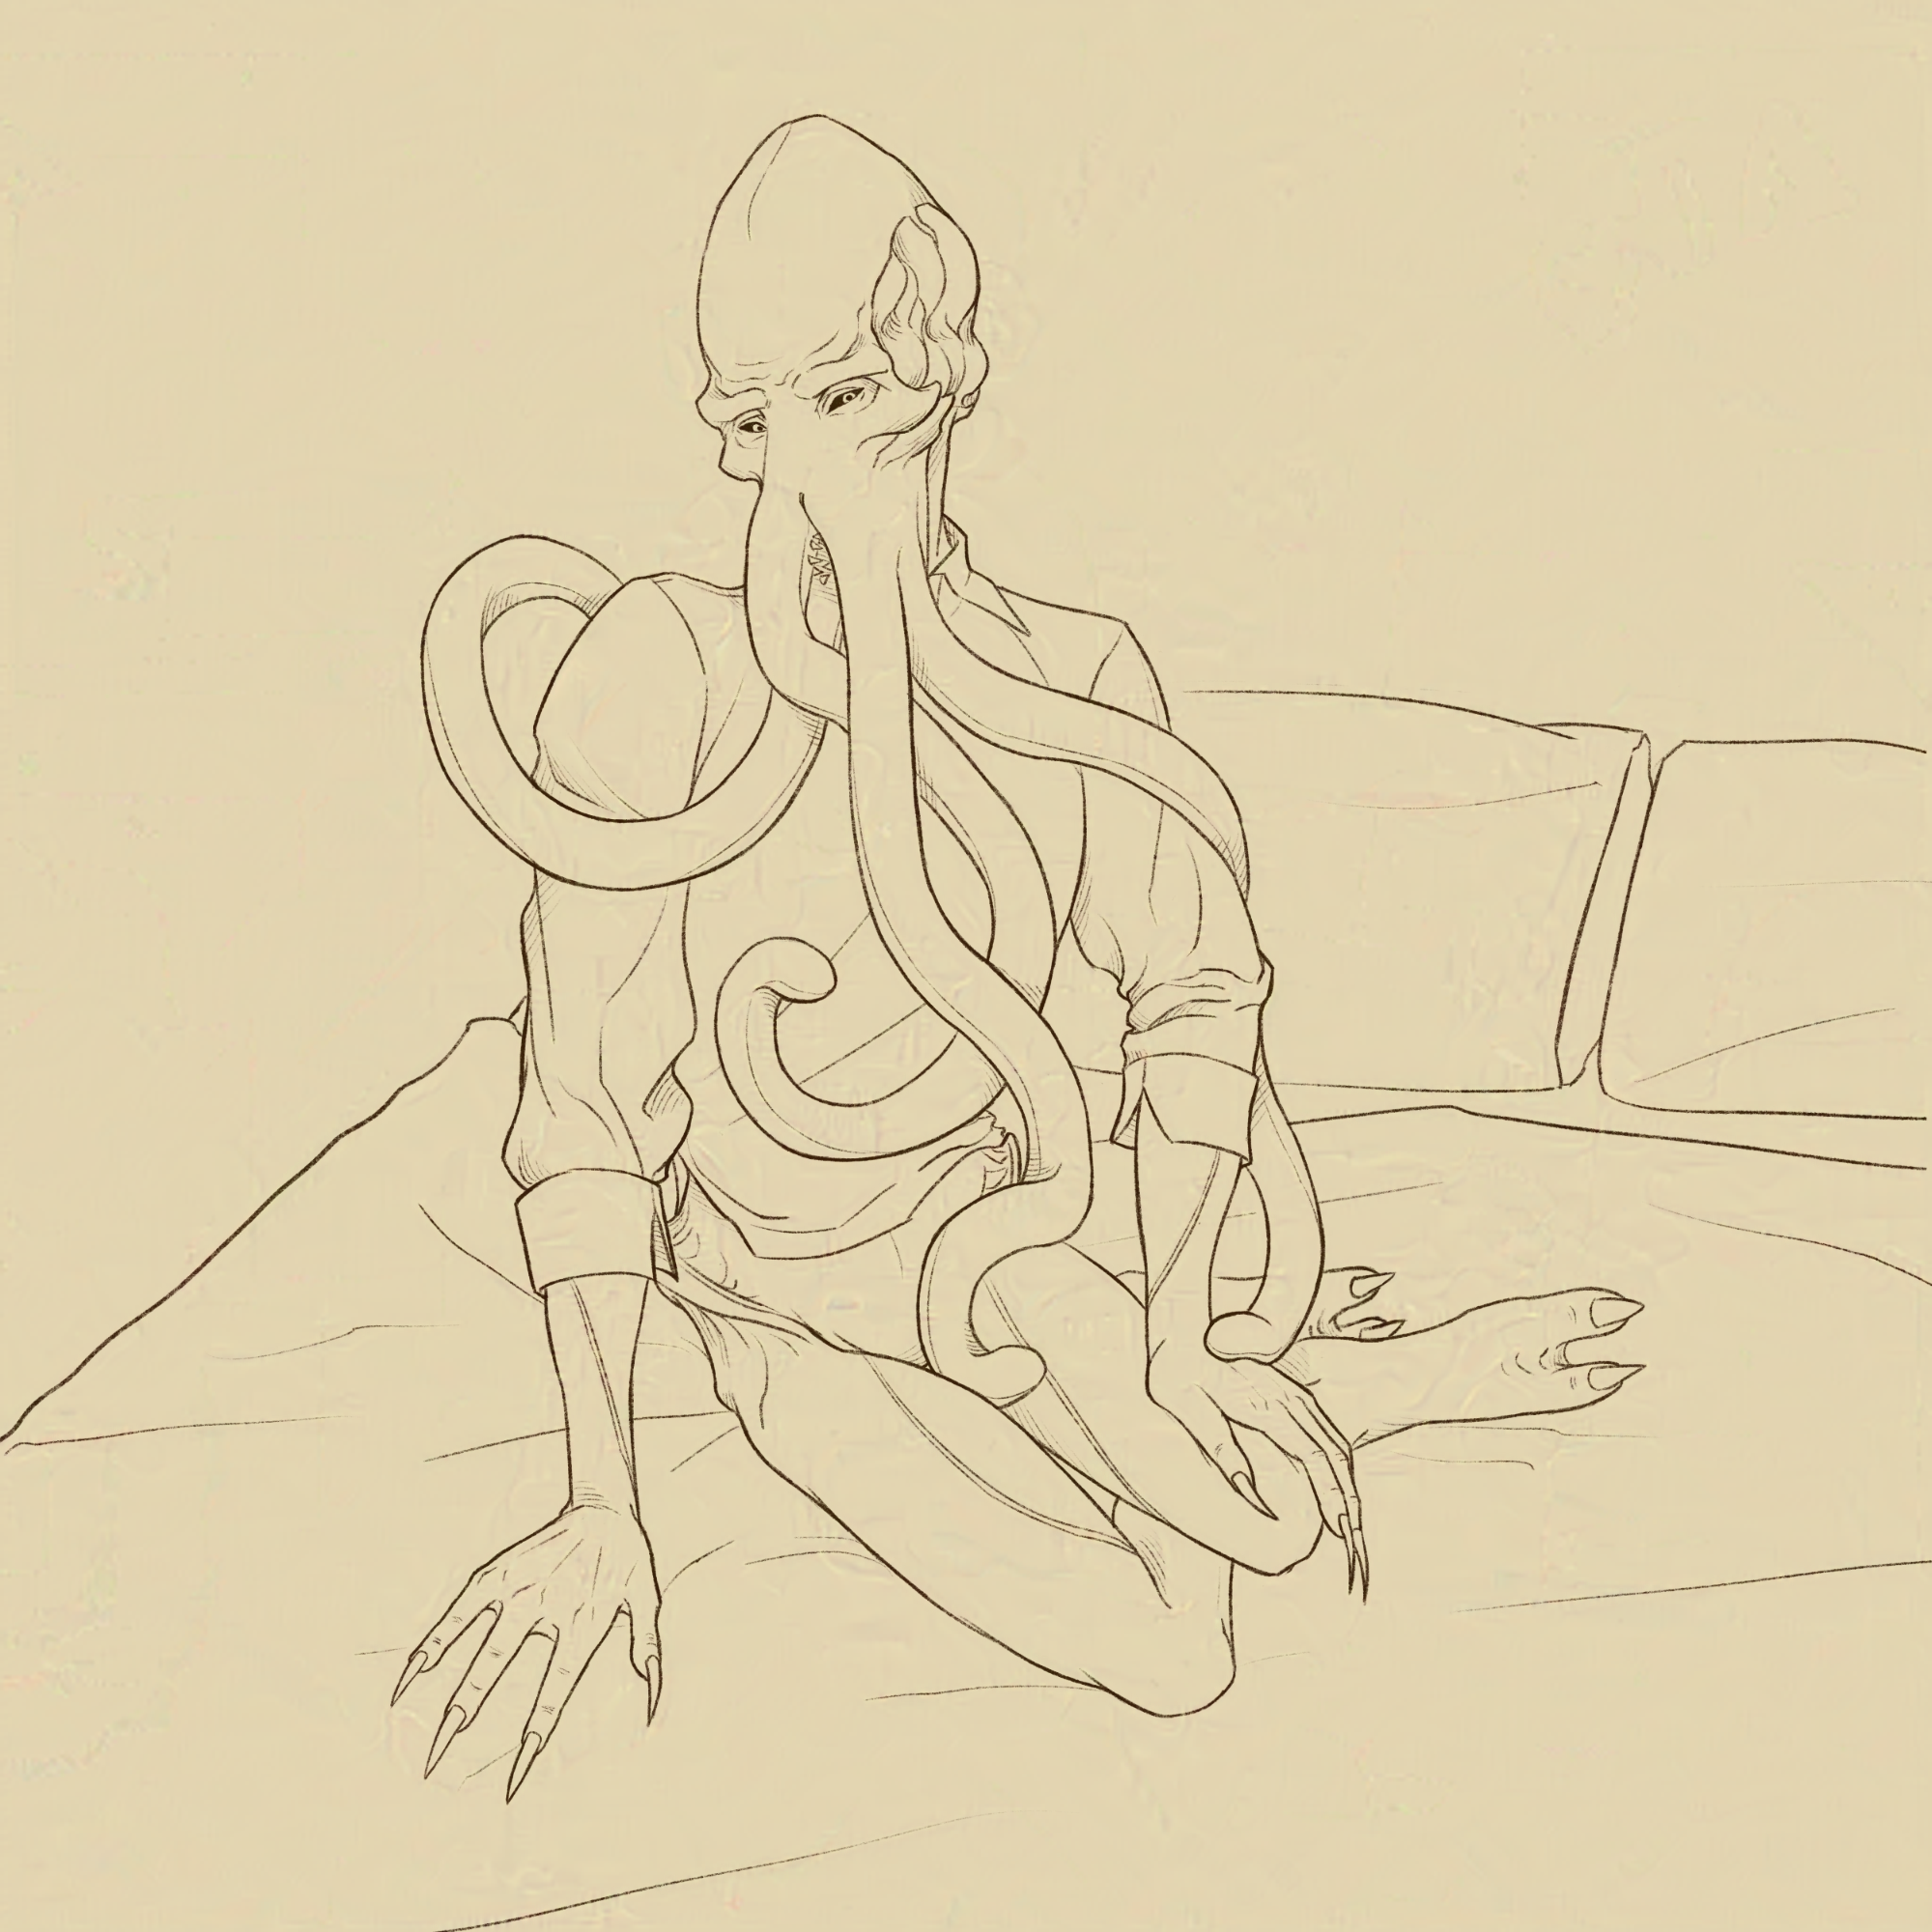 The Emperor (an illithid) is sitting on a bed with their legs swept to the side. They're only dressed in a short small shirt, and they look coy.